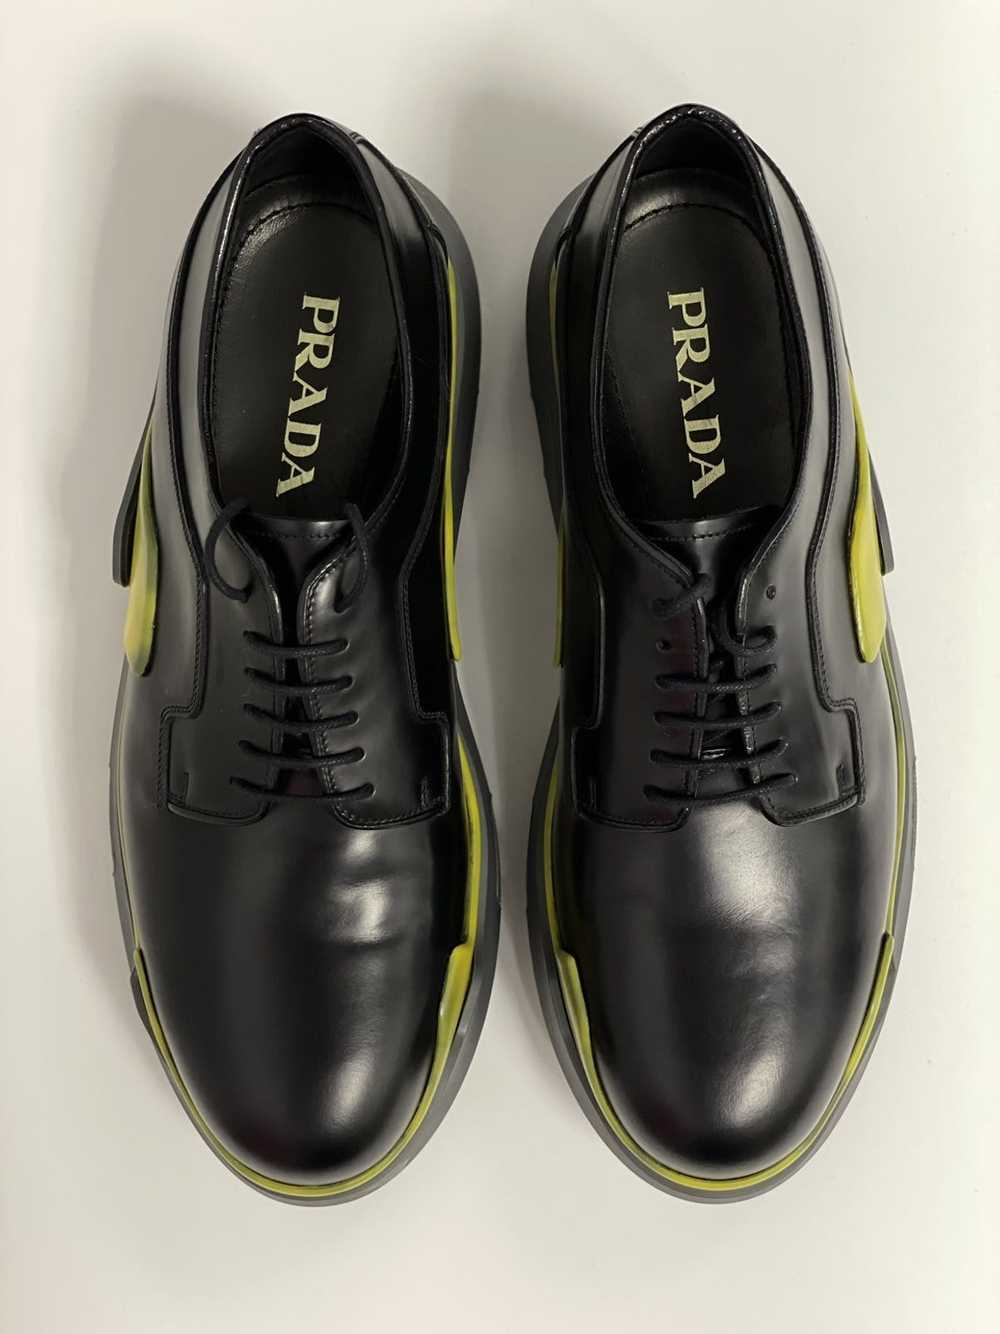 Prada Heavy-Duty Rubber Sole Leather Lace-up Shoes - image 1